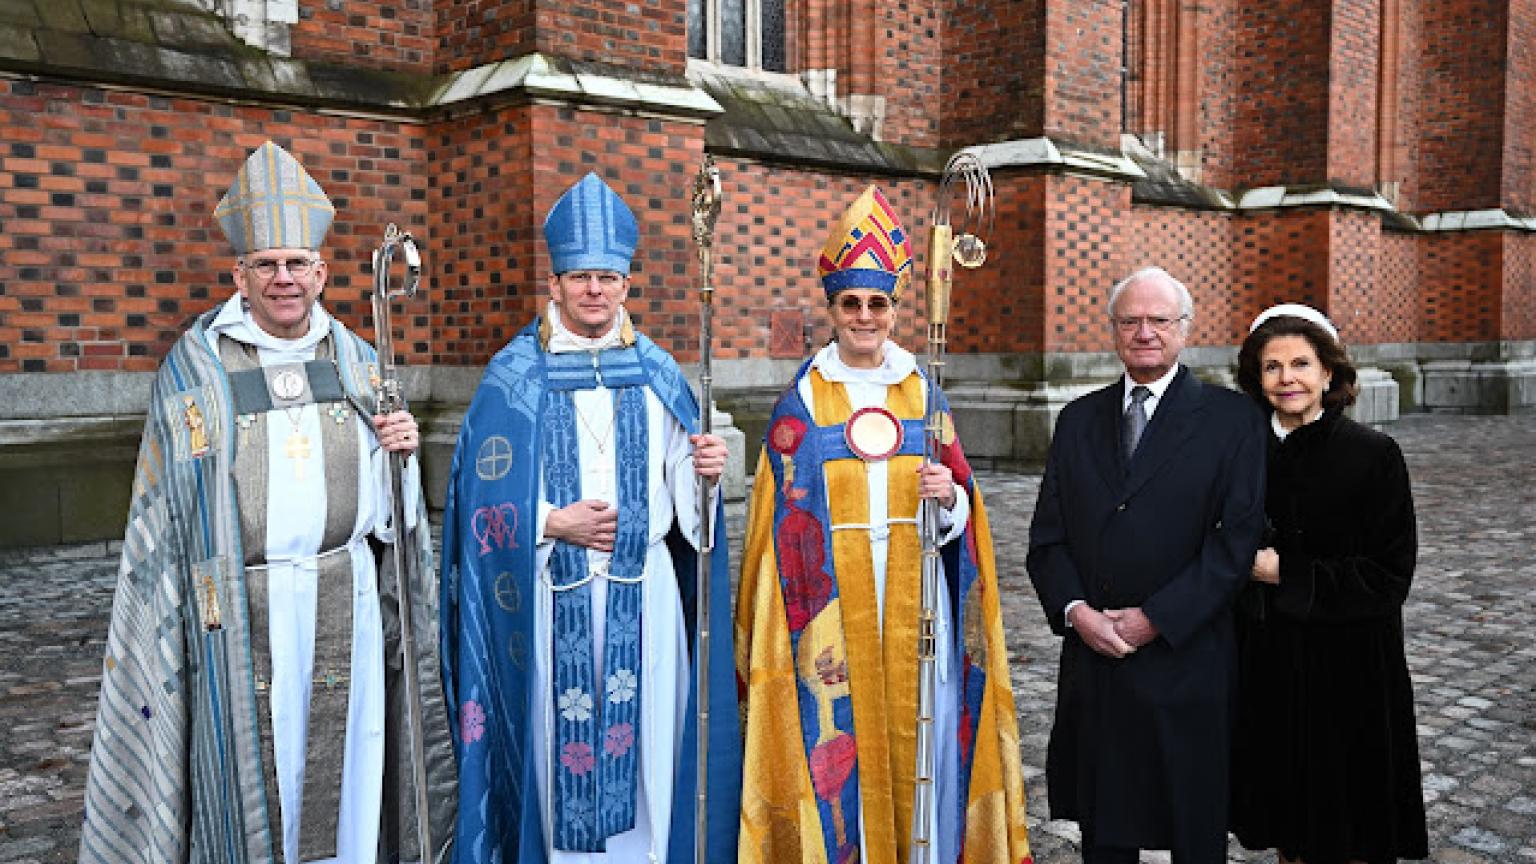  The Archbishop of Uppsala with the two new bishops and Their Majesties, the King and Queen